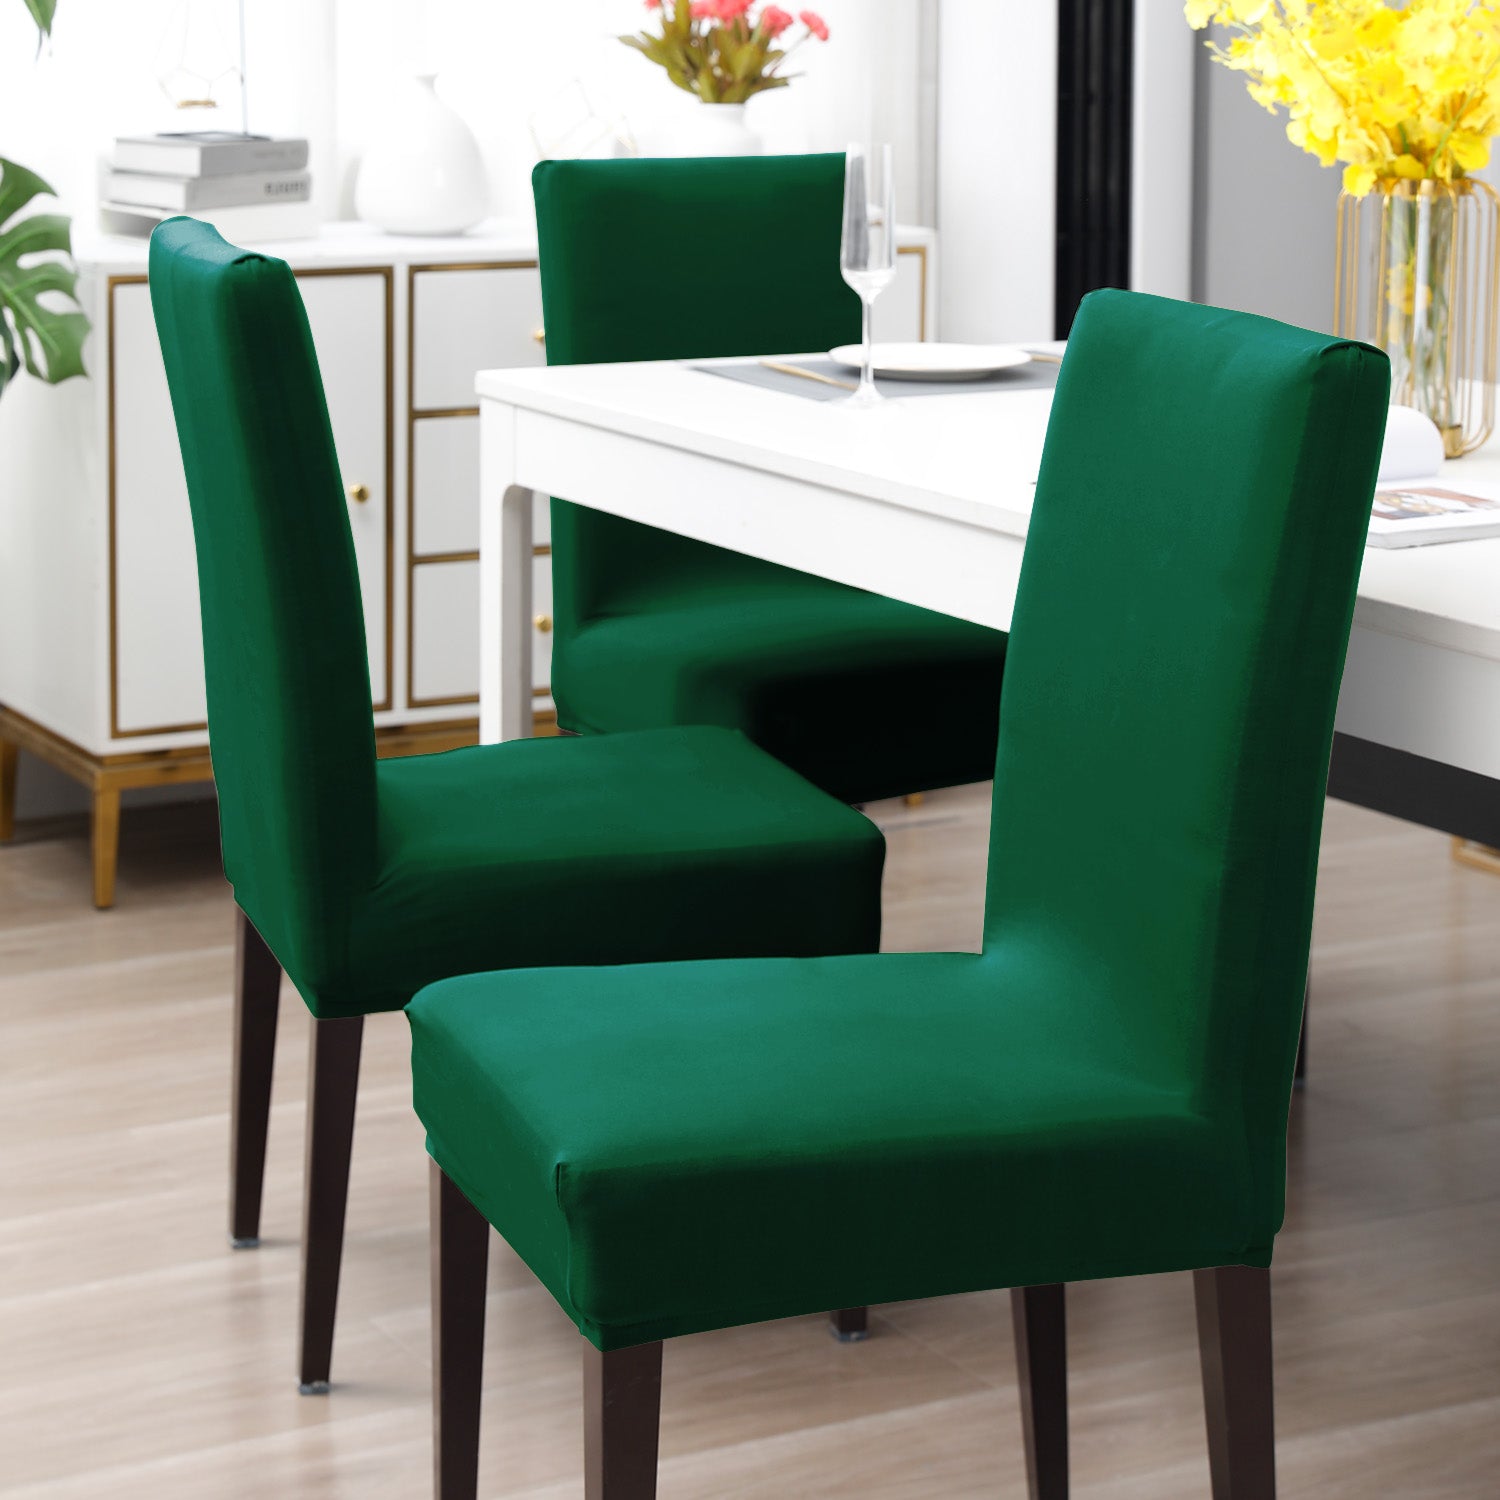 Elastic Stretchable Dining Chair Cover, Bottle Green